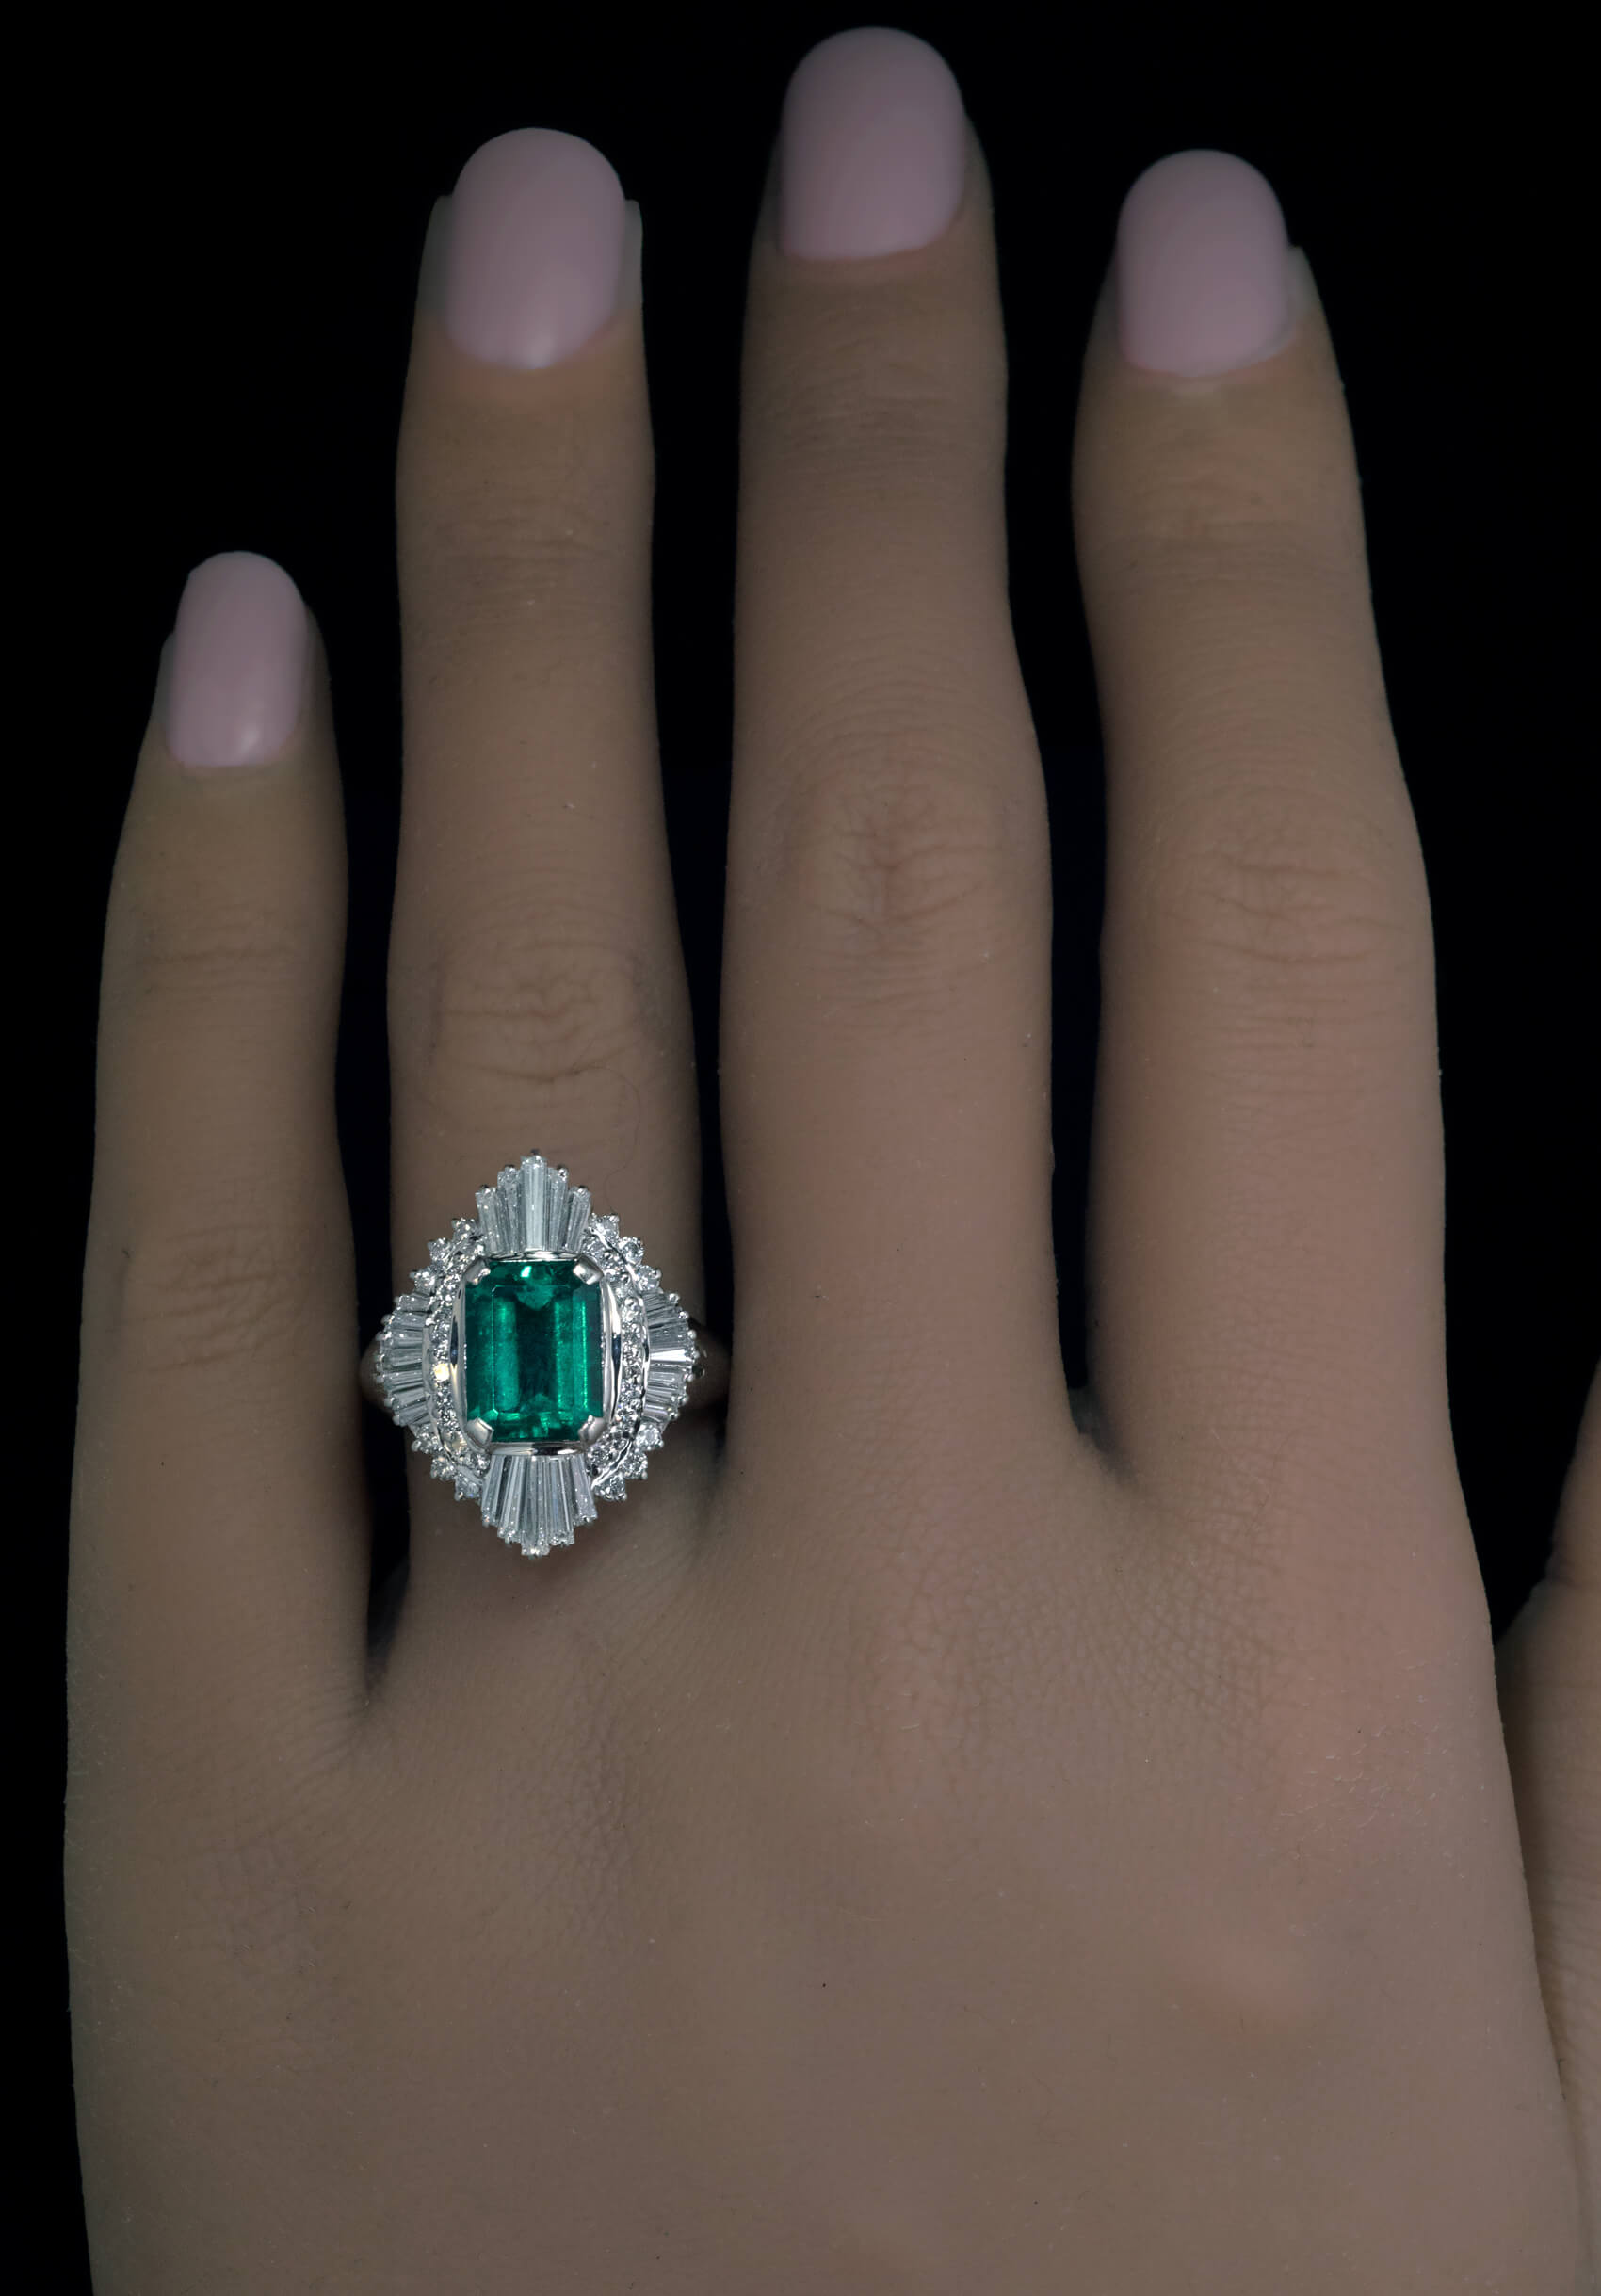 Vintage 2 Ct Colombian Emerald Diamond Engagement Ring Ref: 782560 ...